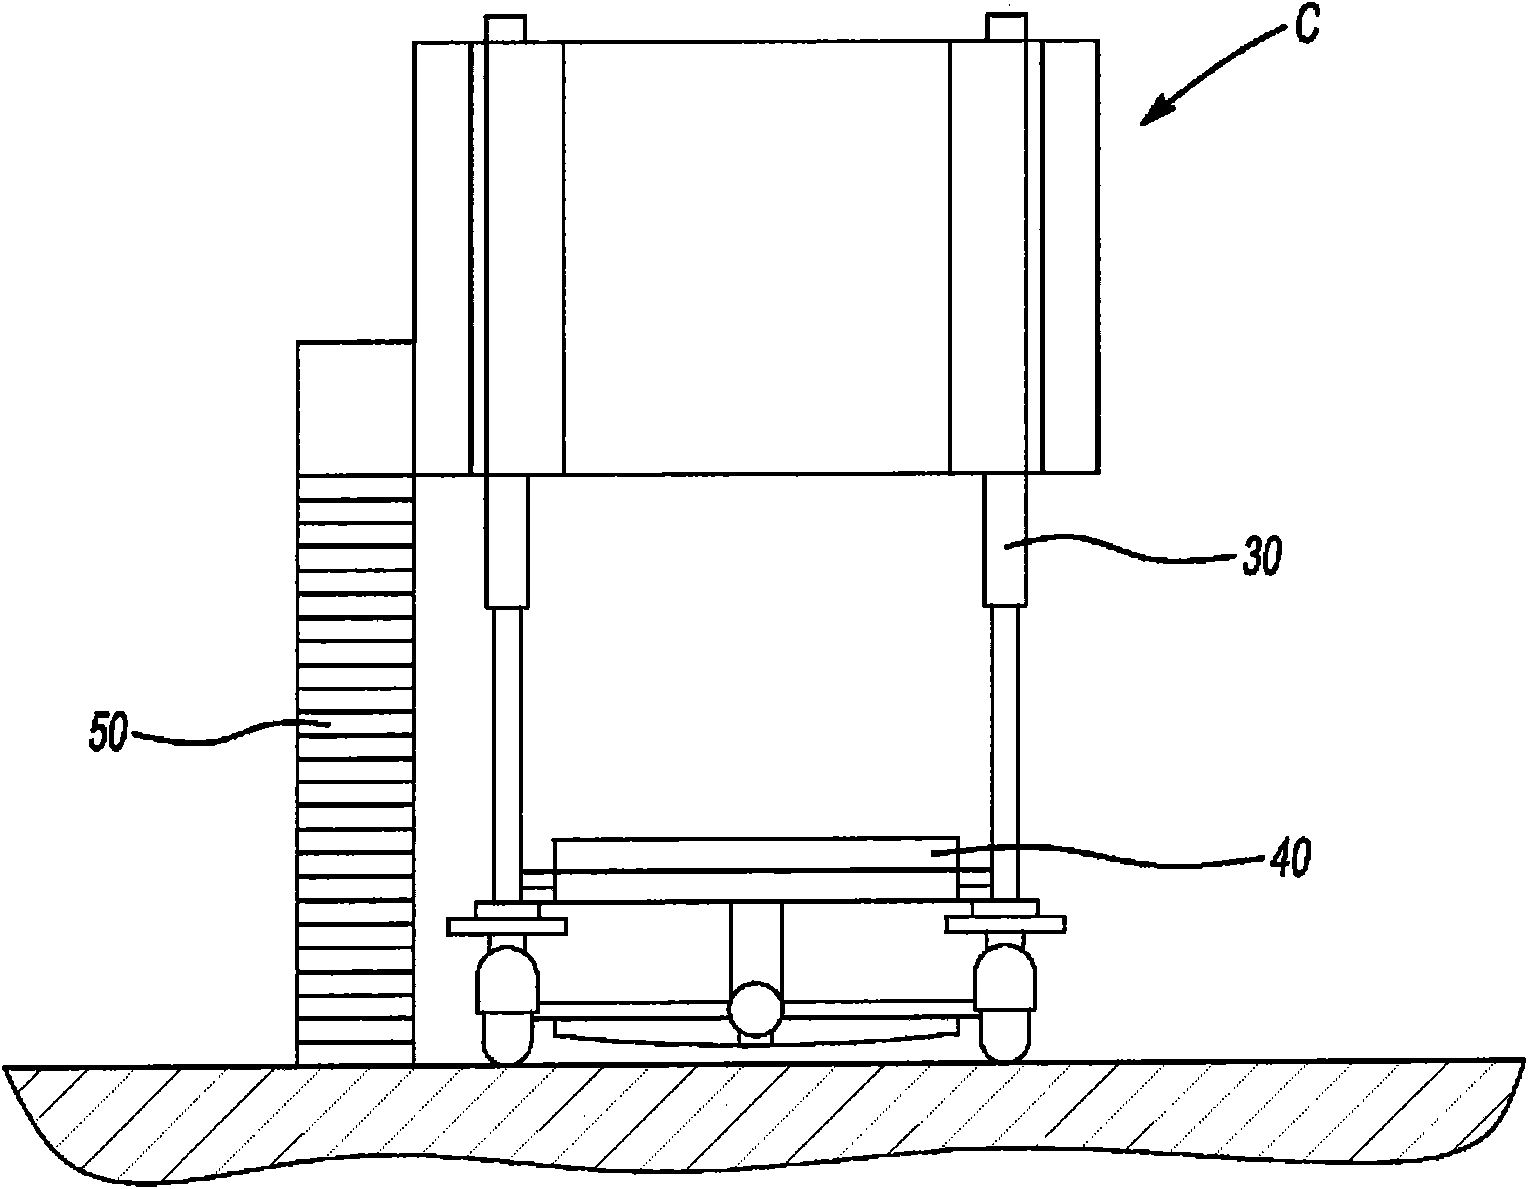 Osculating device for boarding bridge canopy